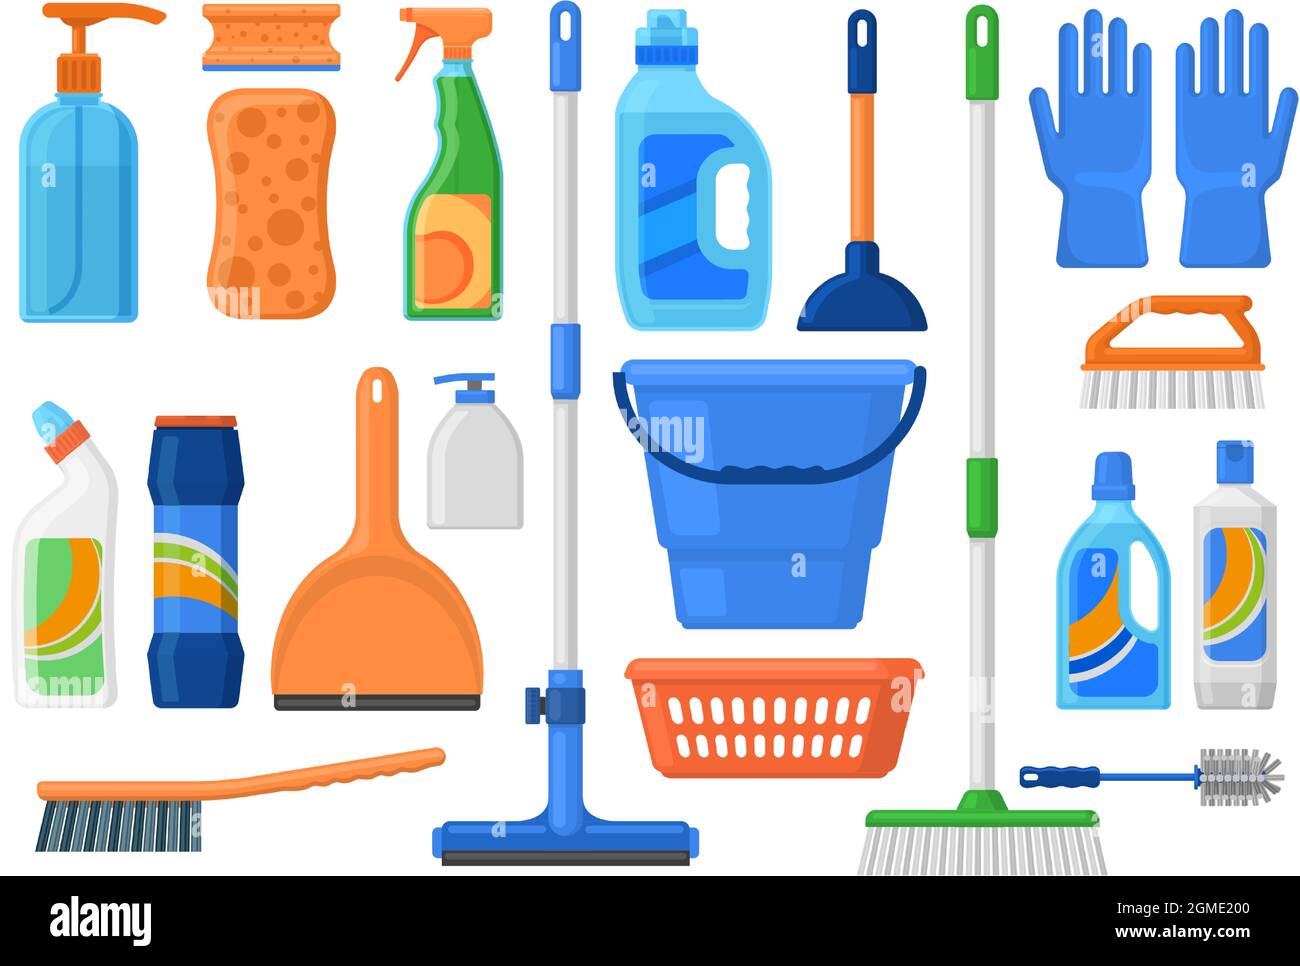 https://c8.alamy.com/comp/2GME200/household-supplies-cleaning-services-tools-and-detergent-bottles-cleaning-supplies-detergents-brush-bucket-and-mop-vector-illustration-set-house-2GME200.jpg